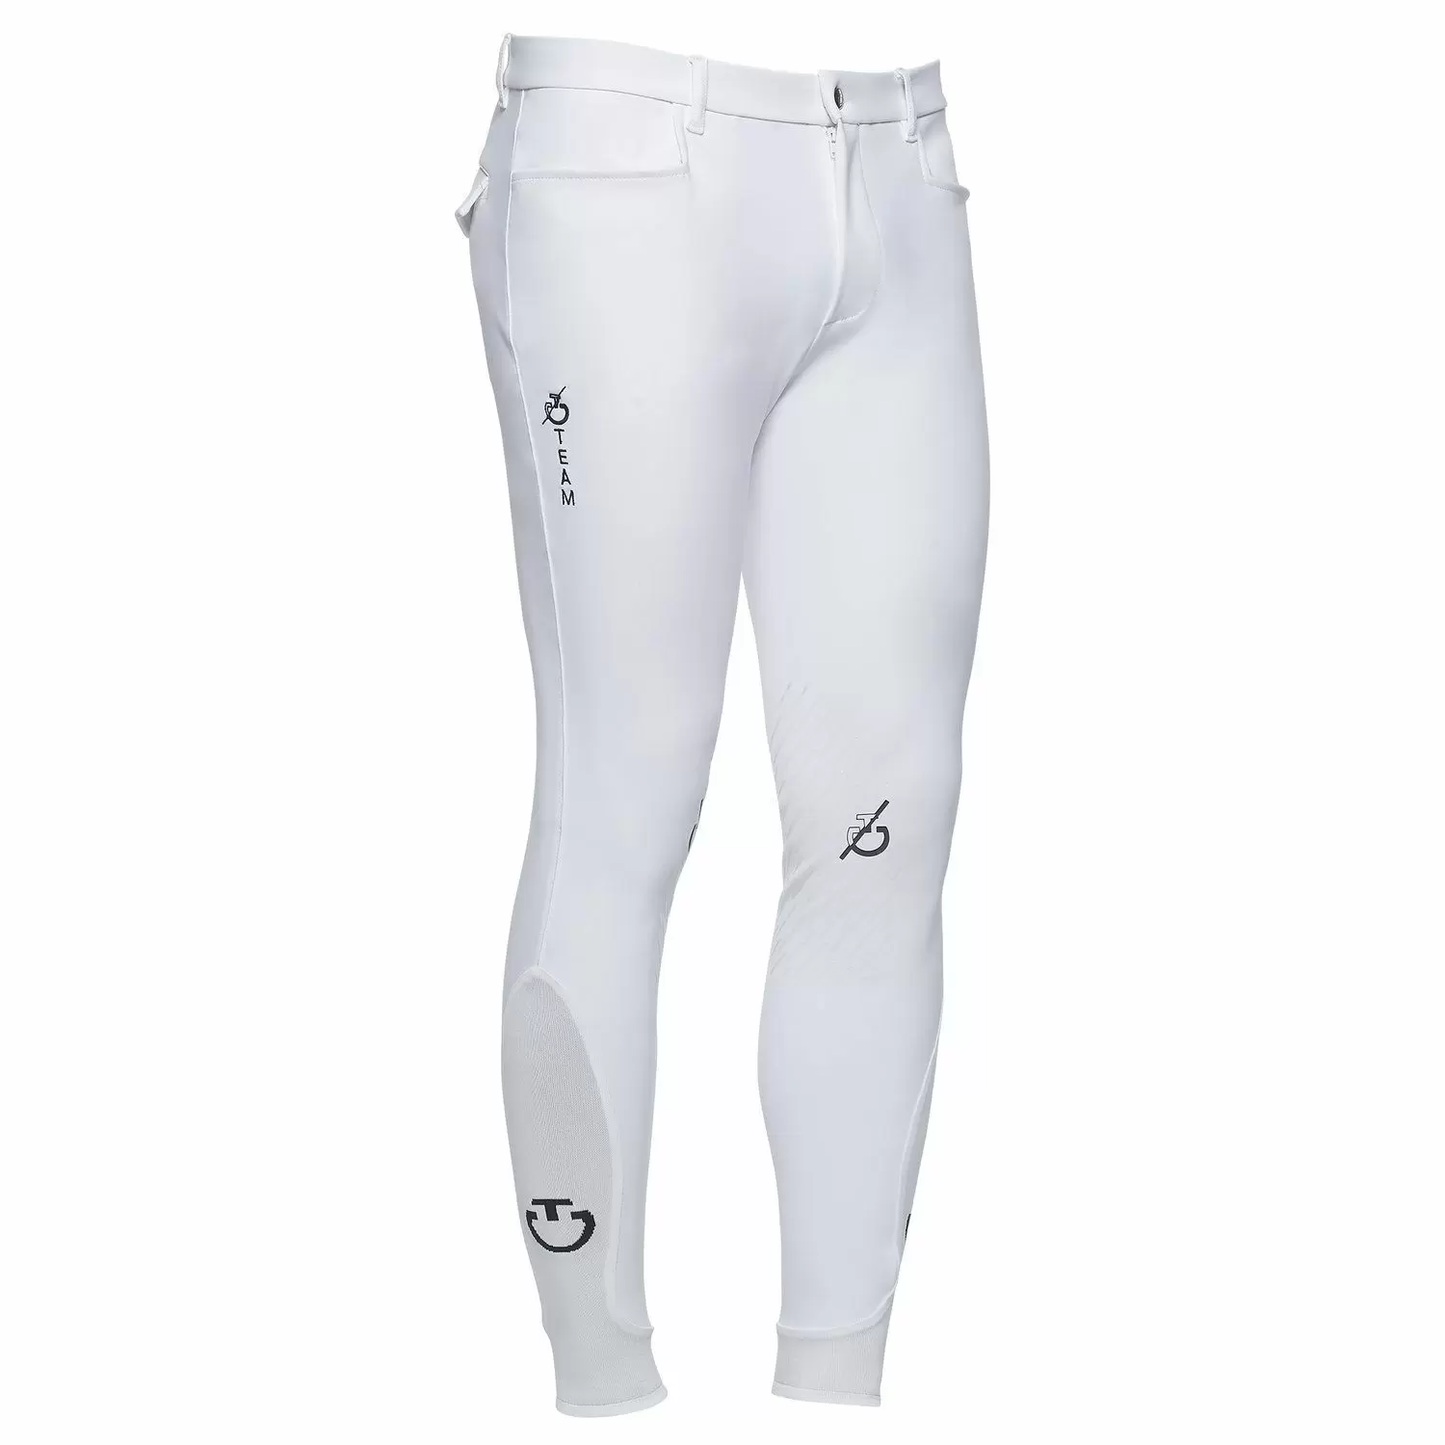 Cavalleria Toscana CT Team Men's Breeches-Trailrace Equestrian Outfitters-The Equestrian